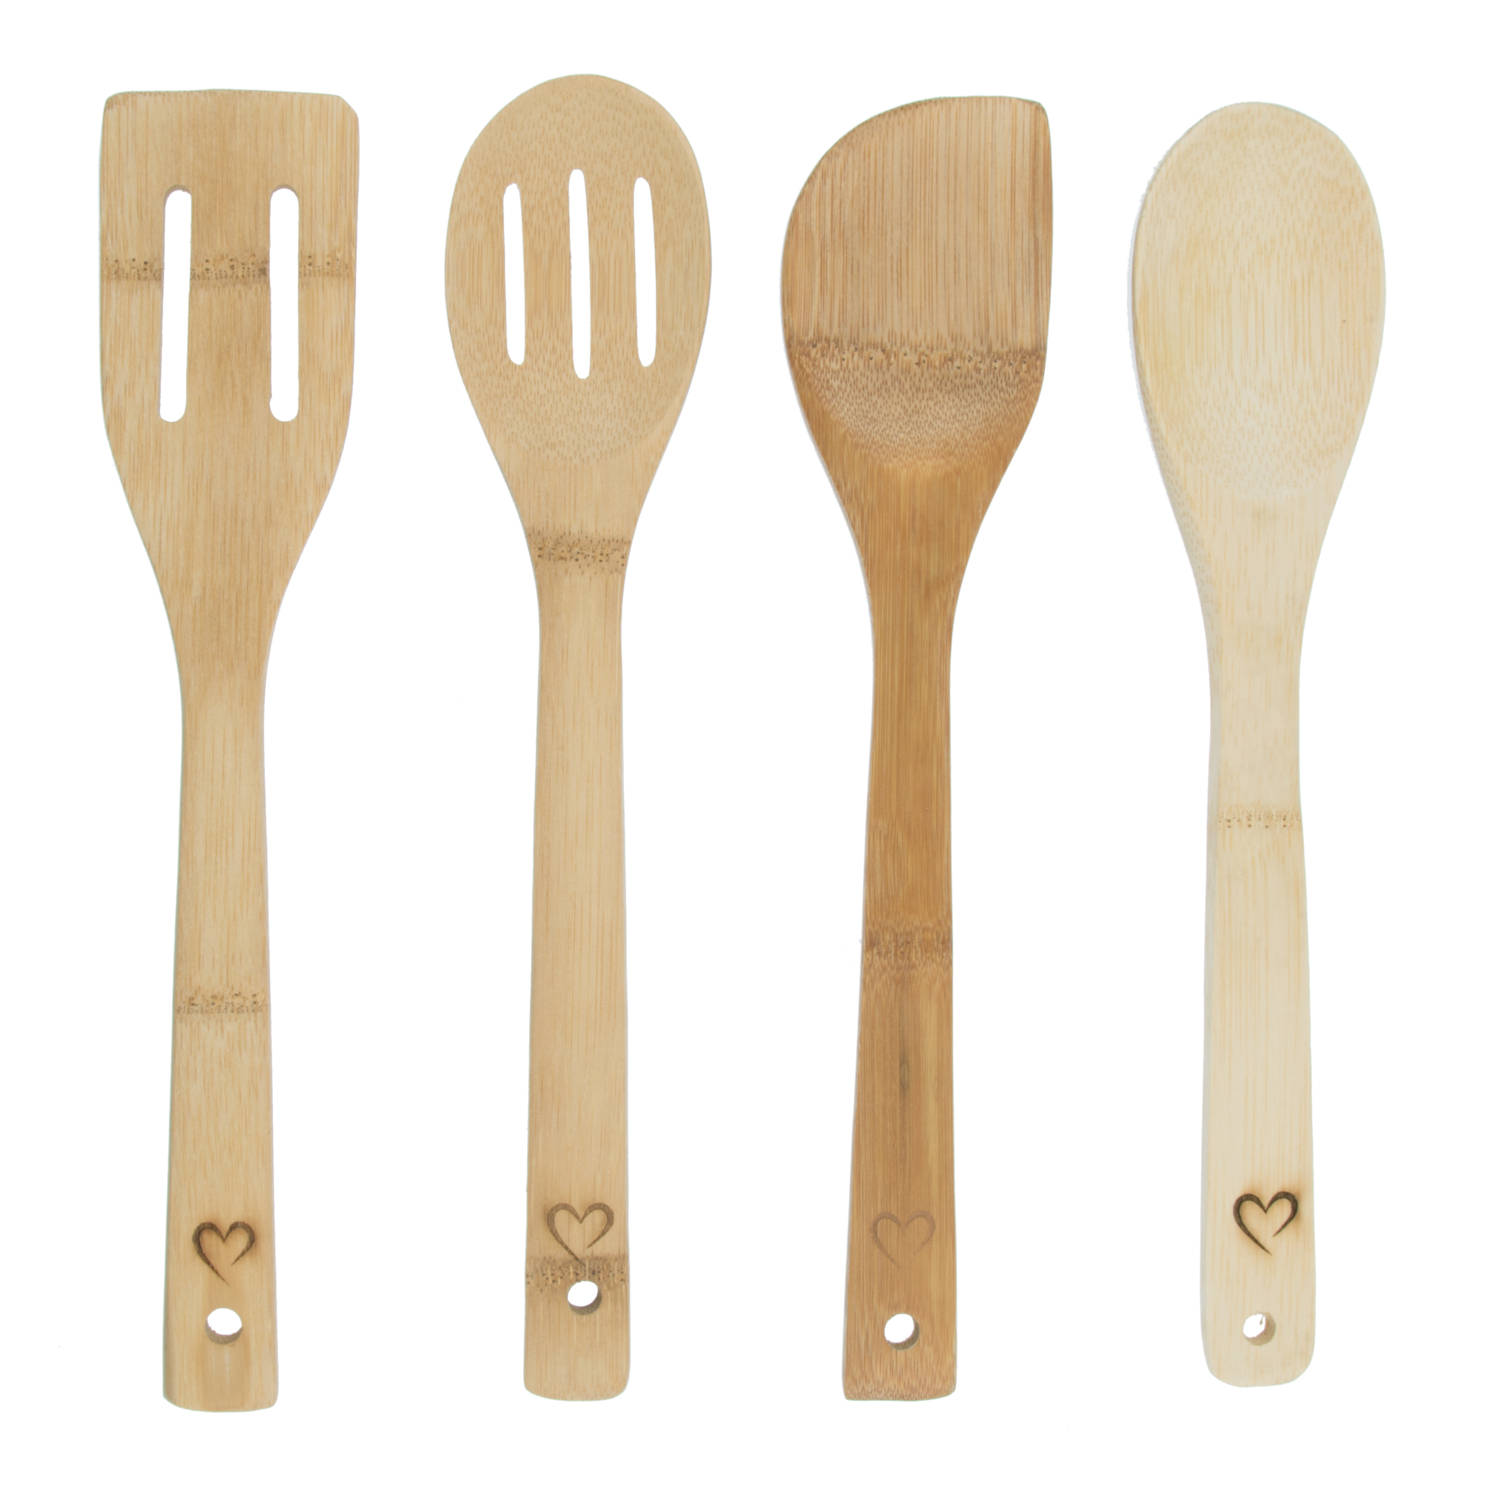 Bamboo Kitchen Utensil and Caddy Set Image 2